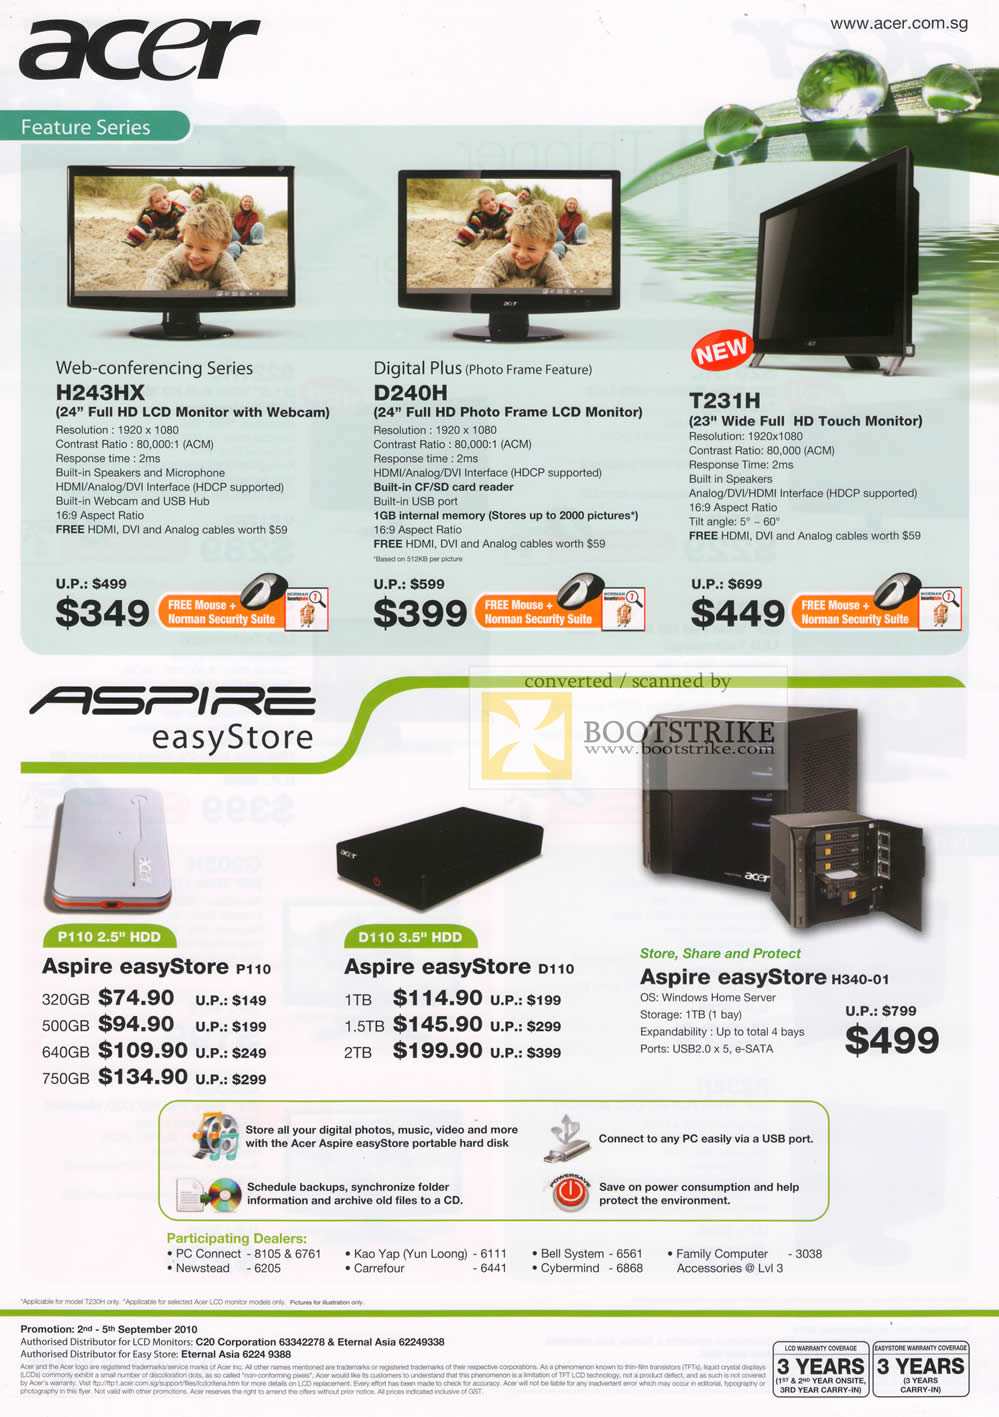 Comex 2010 price list image brochure of Acer LCD Monitors Webcam H243HX D240H Digital Photo Frame T231H Touch External Storage Aspire EasyStore H340 D110 P110